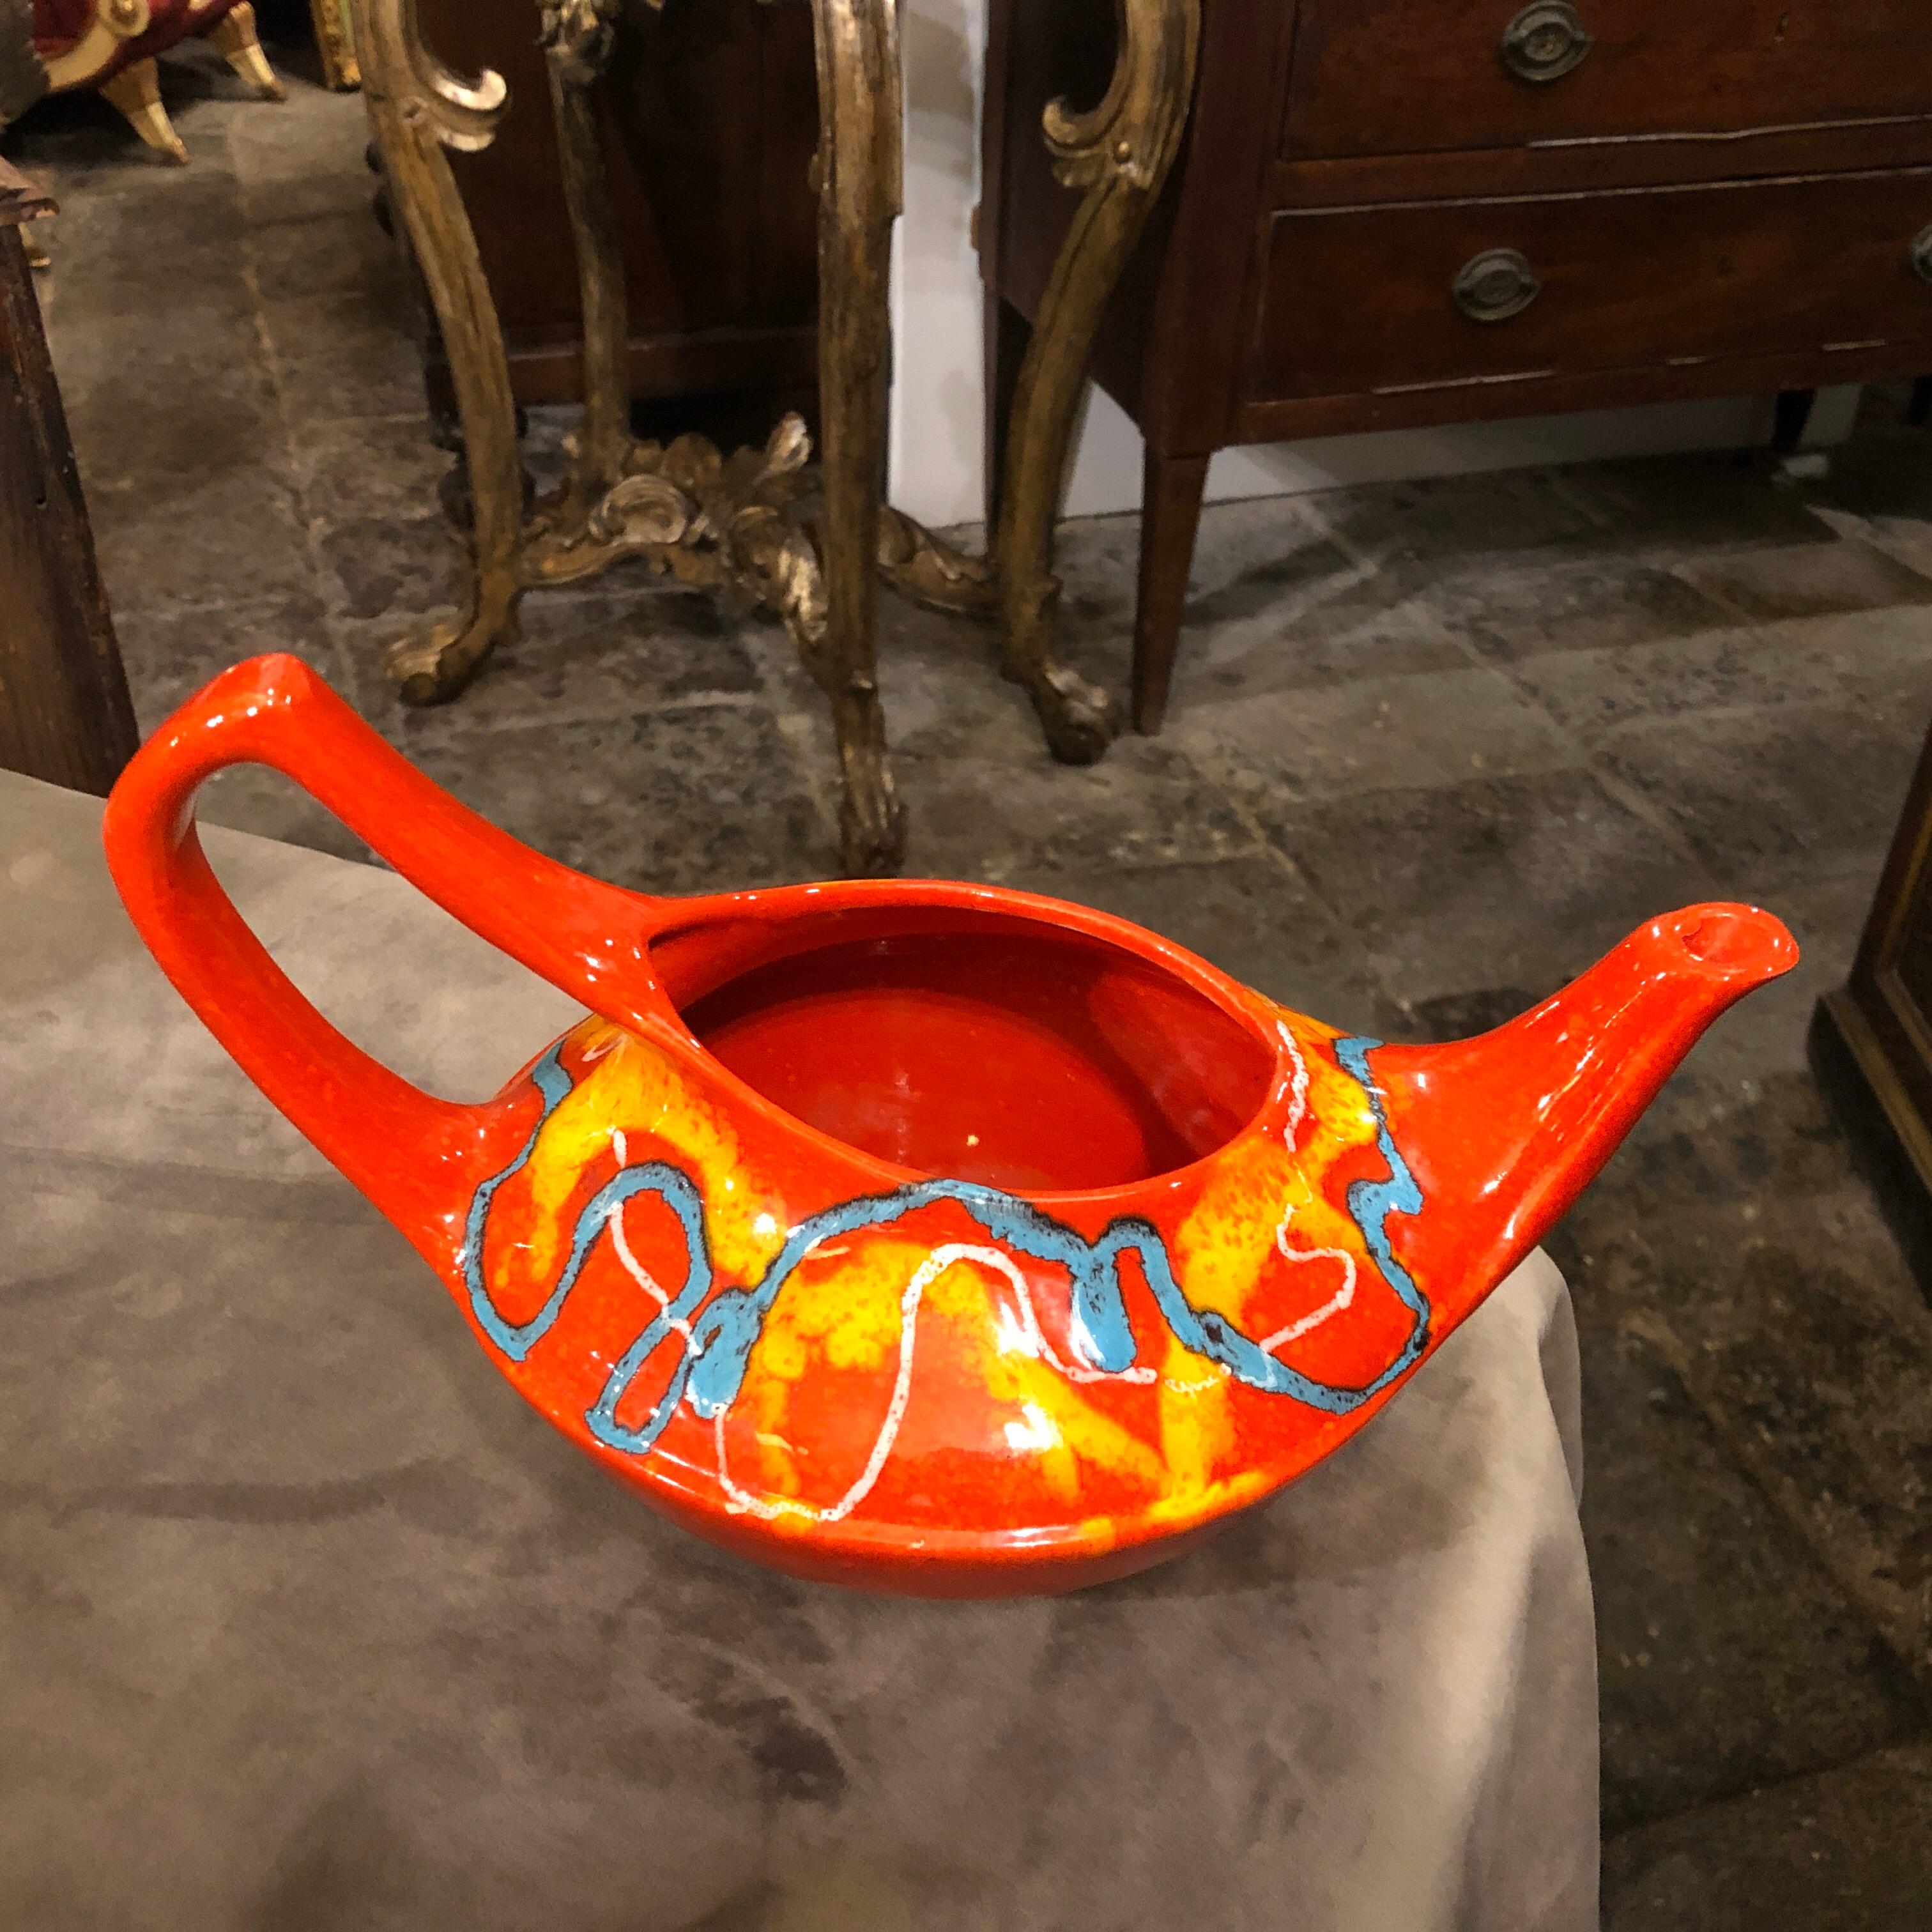 A red blue and yellow ceramic pitcher designed and manufactured in Italy by Bertoncello in the 1970s. Good conditions overall. The Bertoncello pottery company was founded in 1909 in Italy and gained recognition for its ceramics during the mid-20th